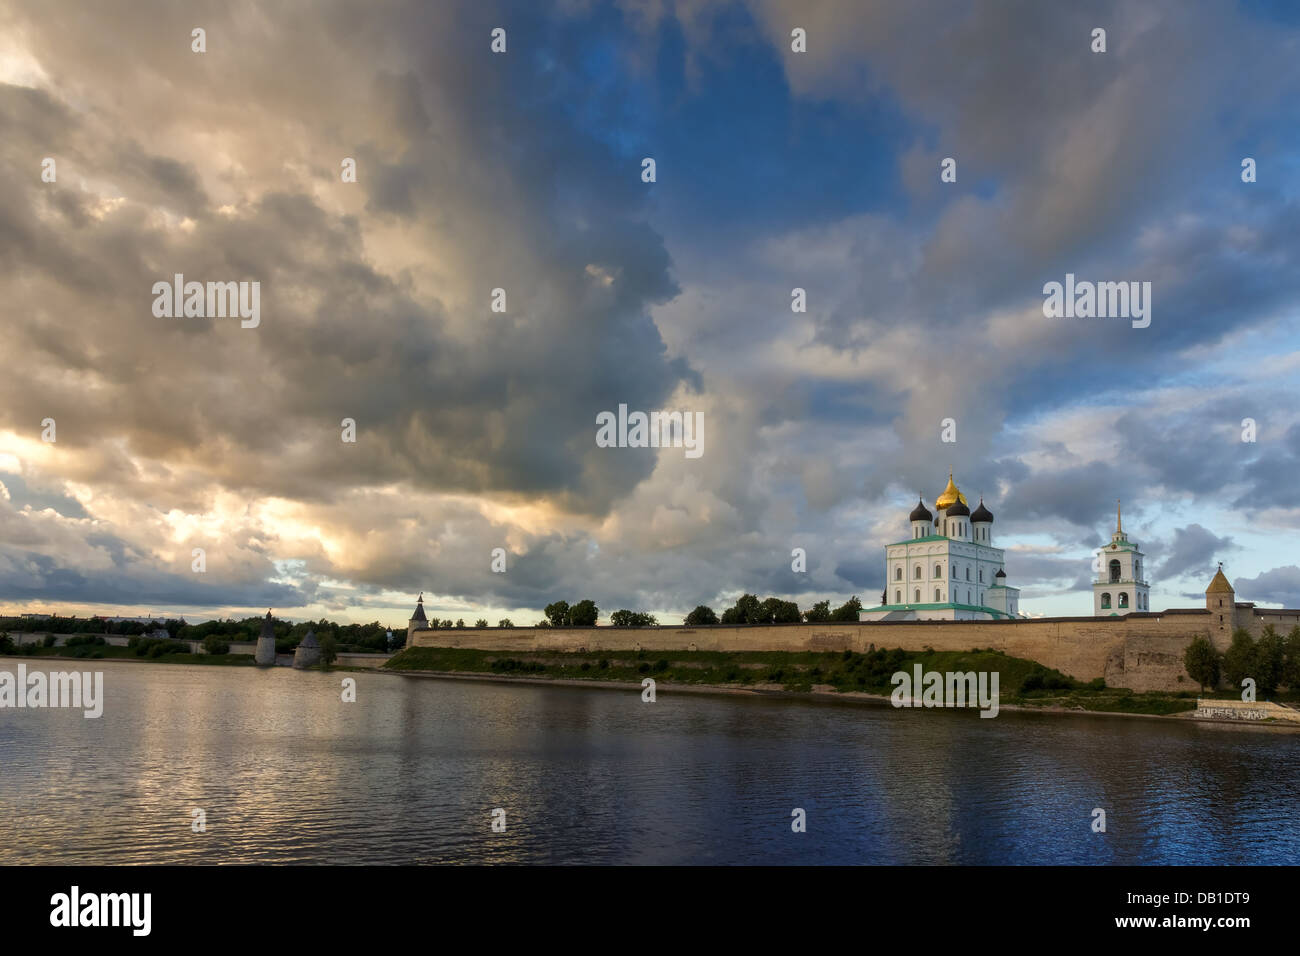 Pskov Kremlin in the evening before the storm, Russia Stock Photo